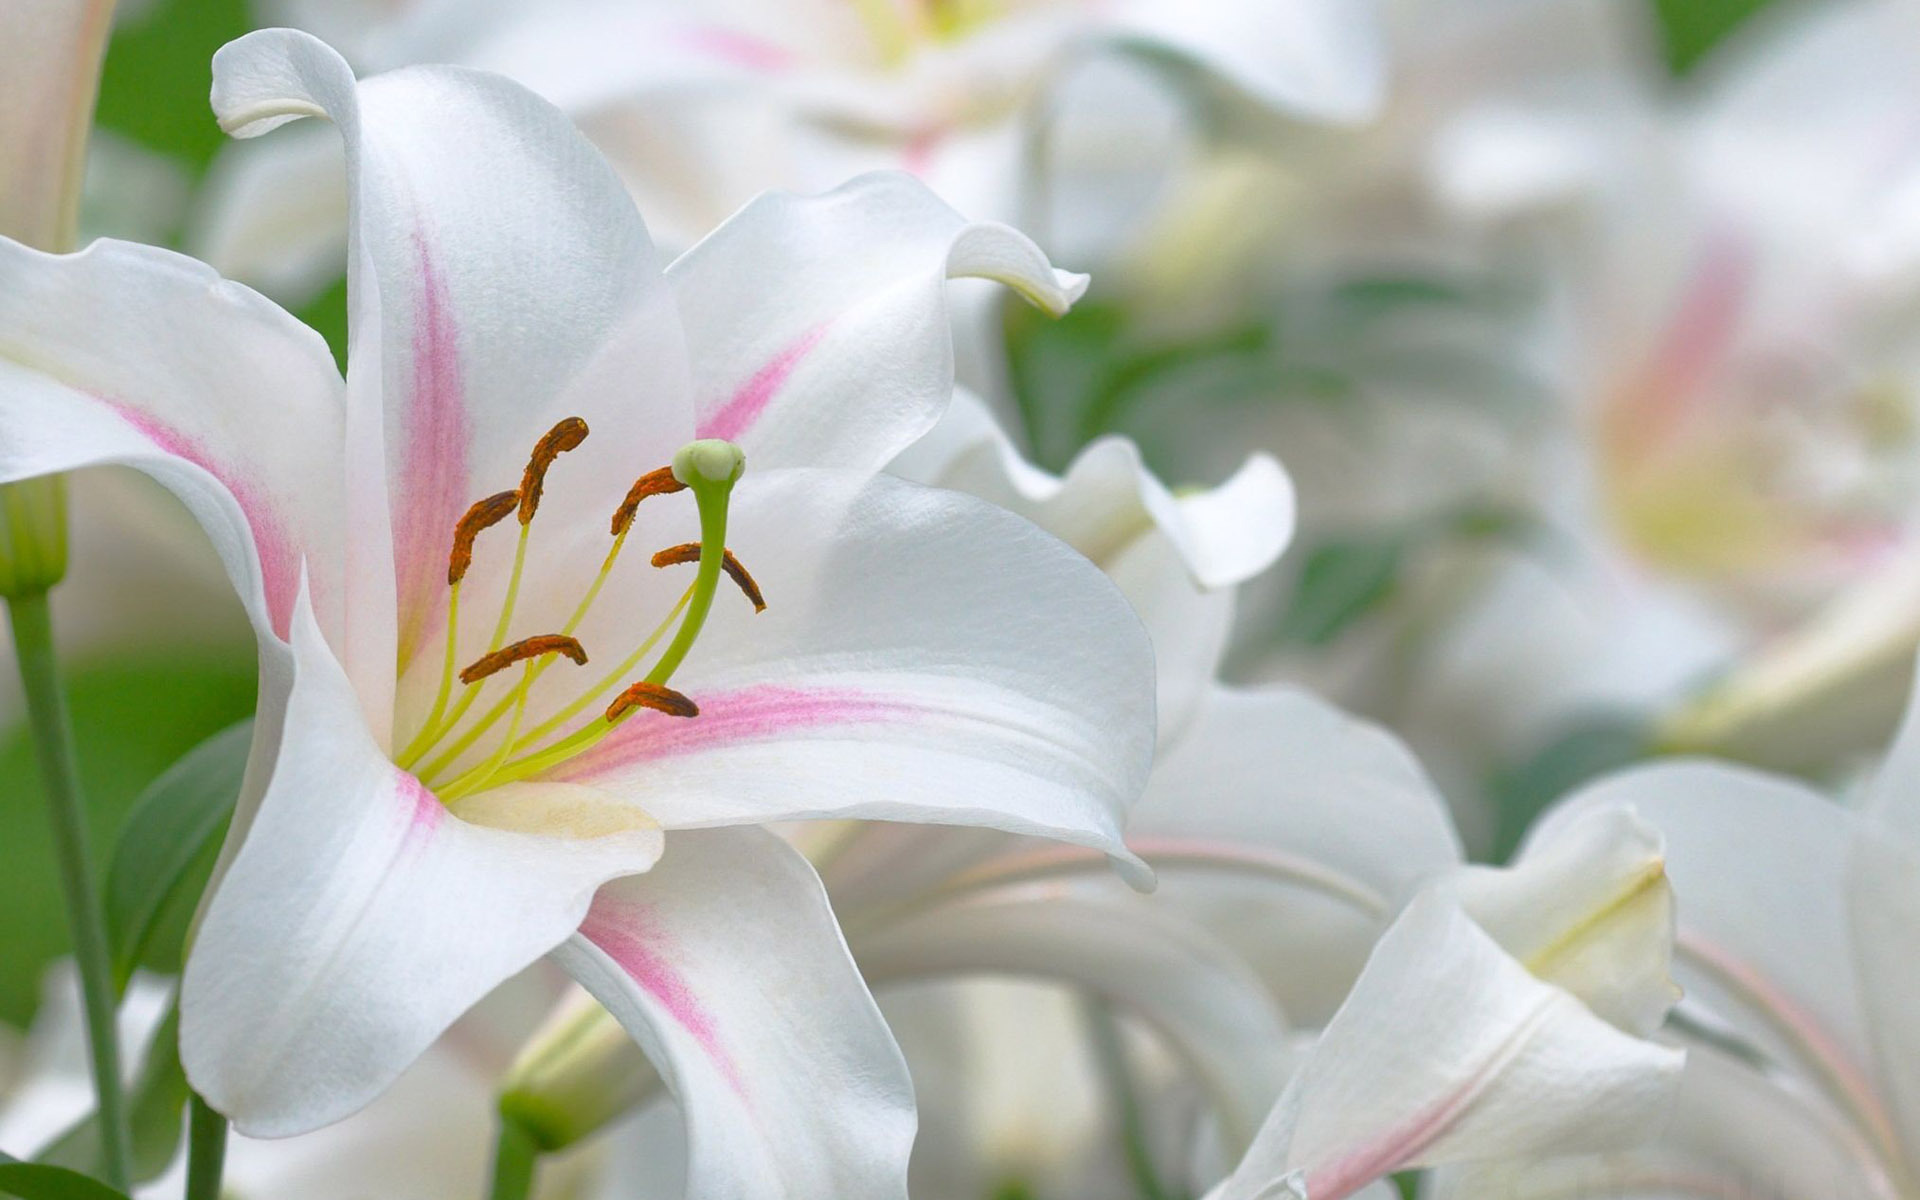 15 Best lily flower desktop wallpaper You Can Use It For Free ...